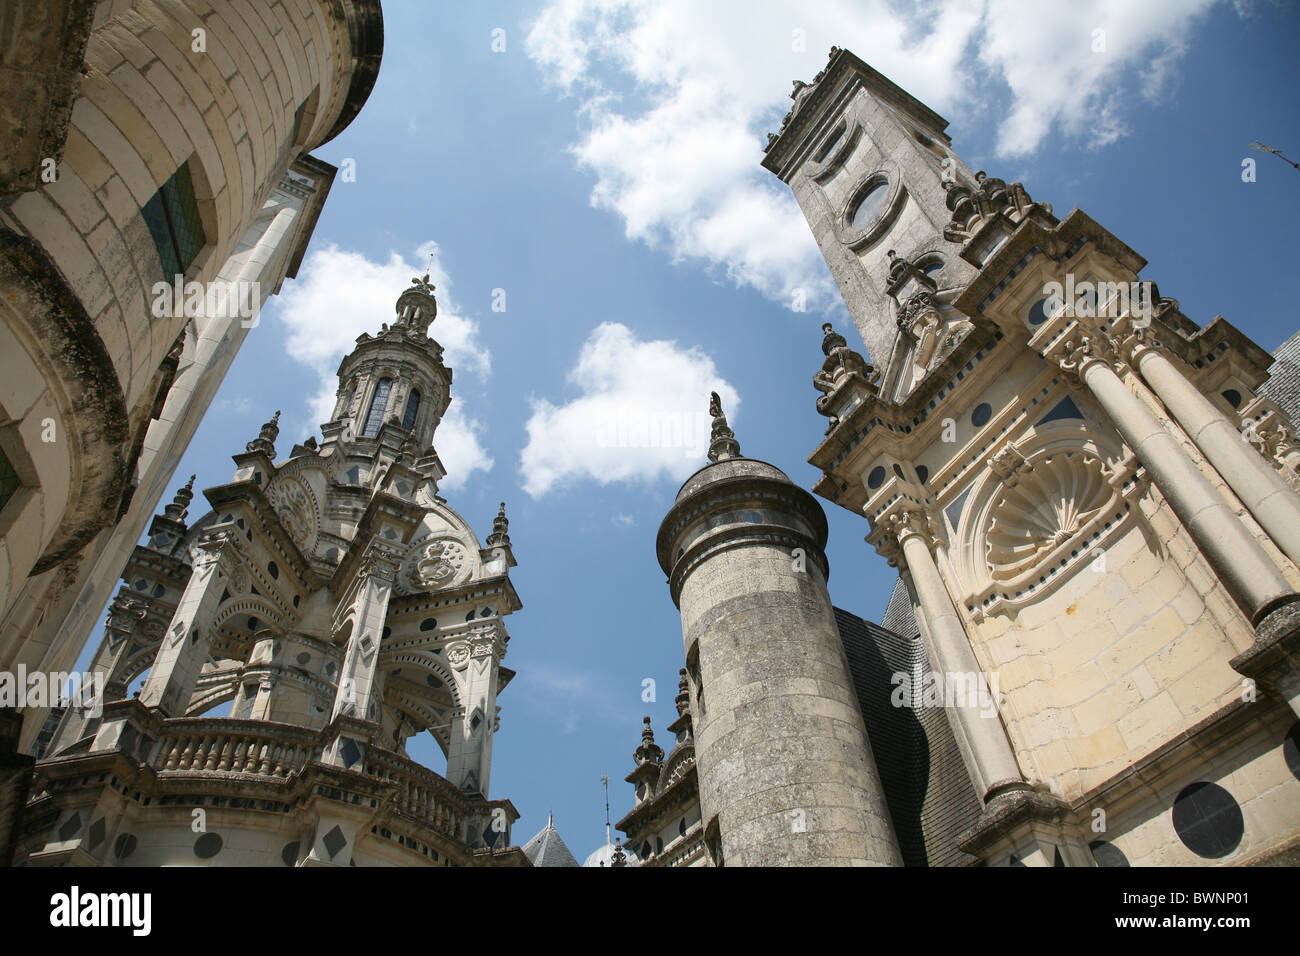 Roof structures of Chateau de Chambord Stock Photo